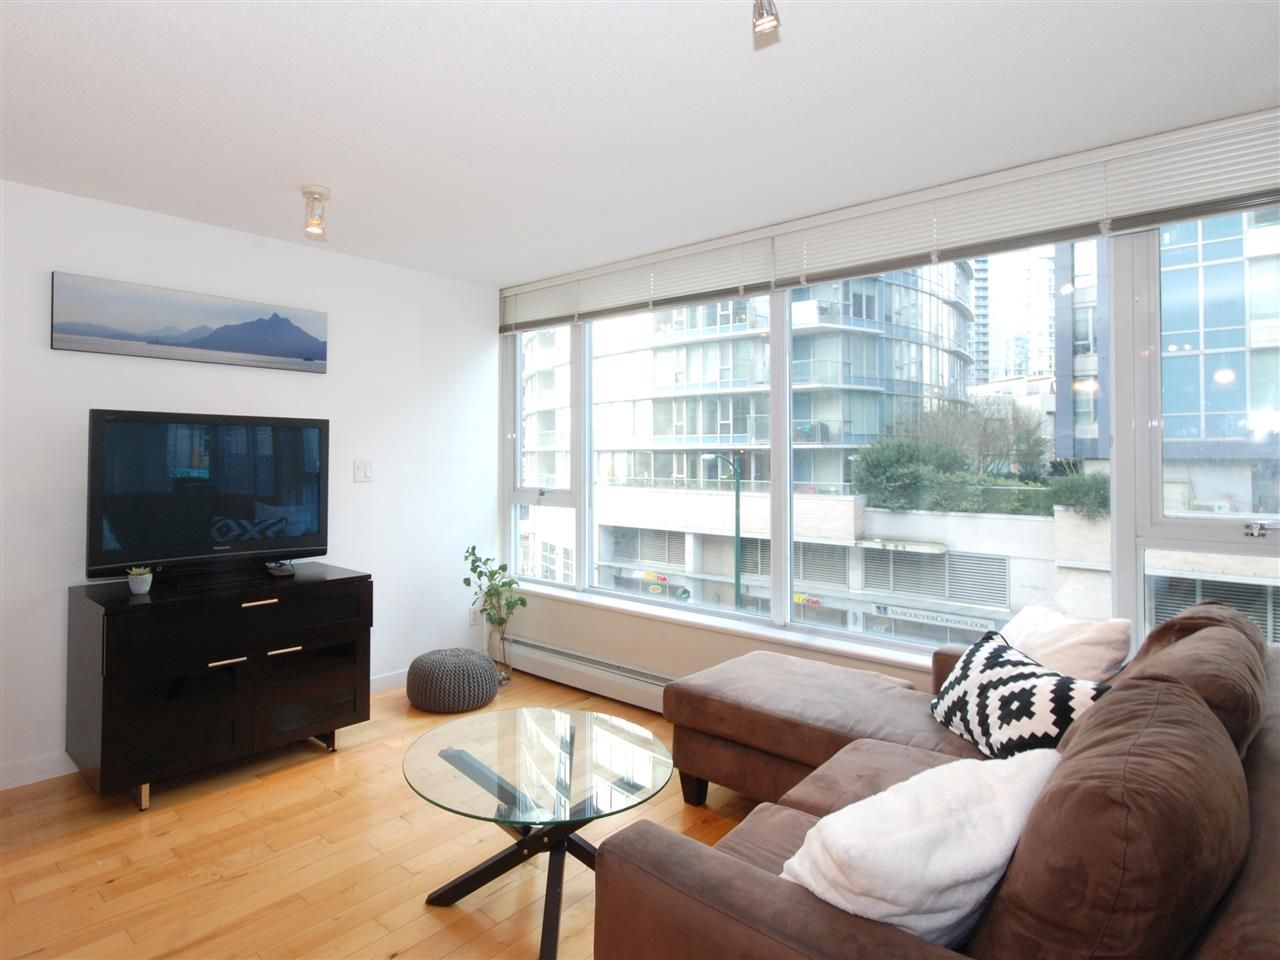 Main Photo: 306 618 ABBOTT STREET in : Downtown VW Condo for sale : MLS®# R2340667